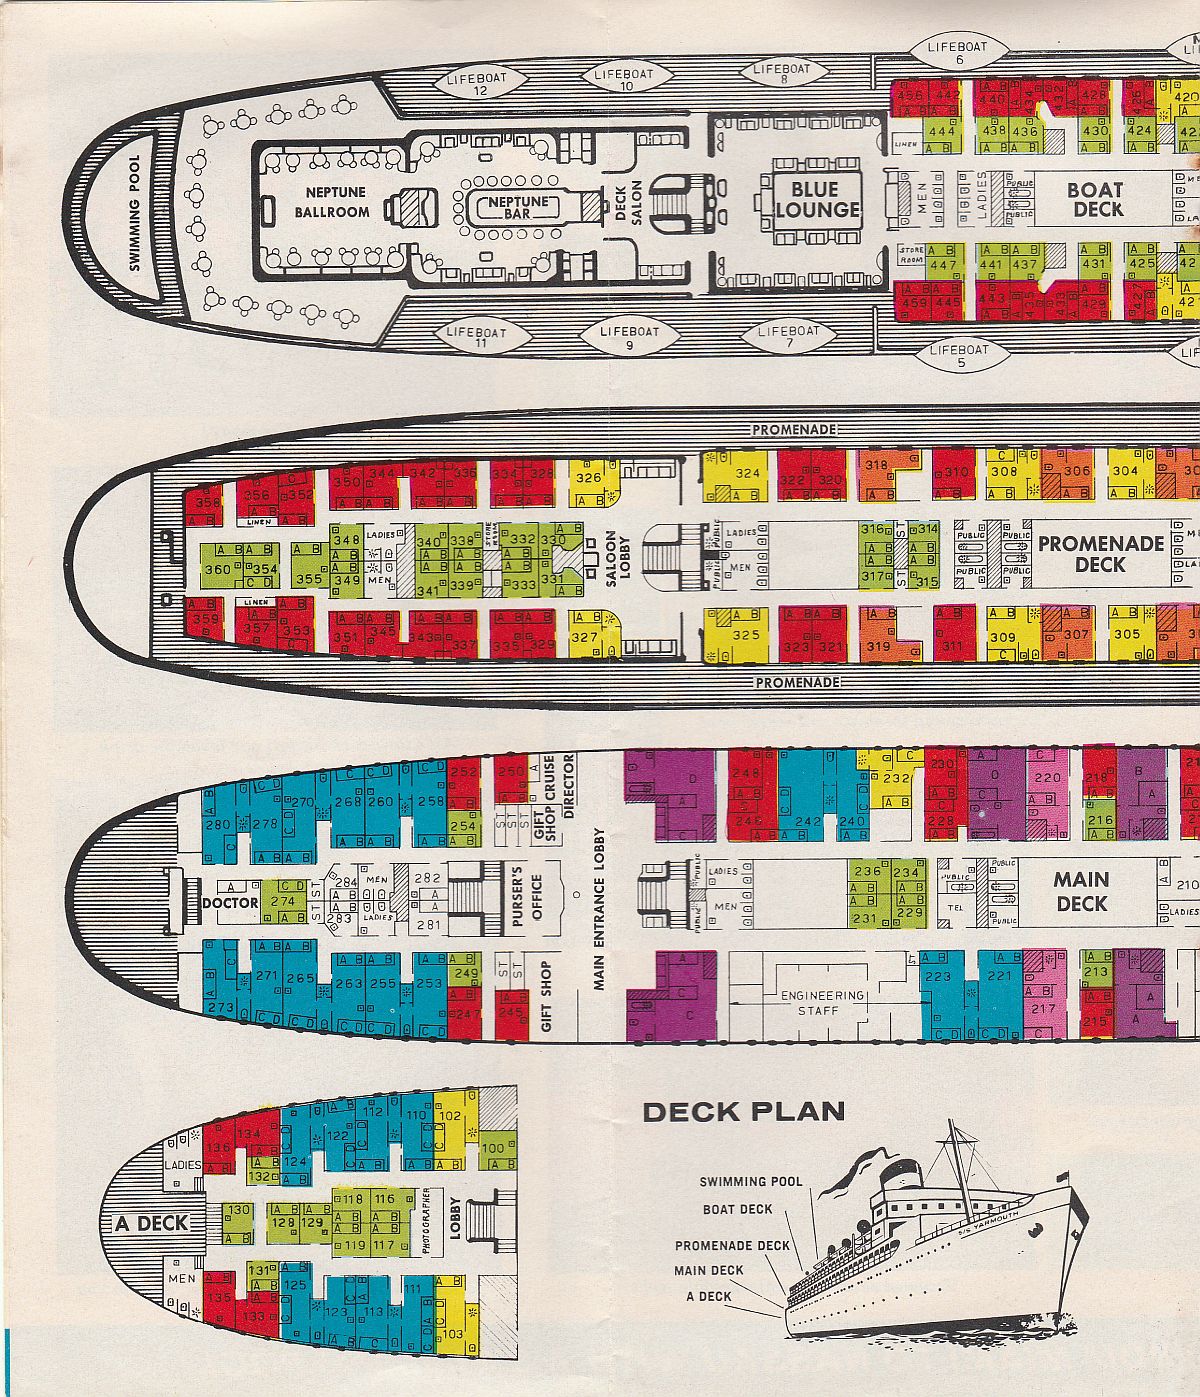 ss Yarmouth Deck plan: Boat, Promenade, Main and A Decks (left page)